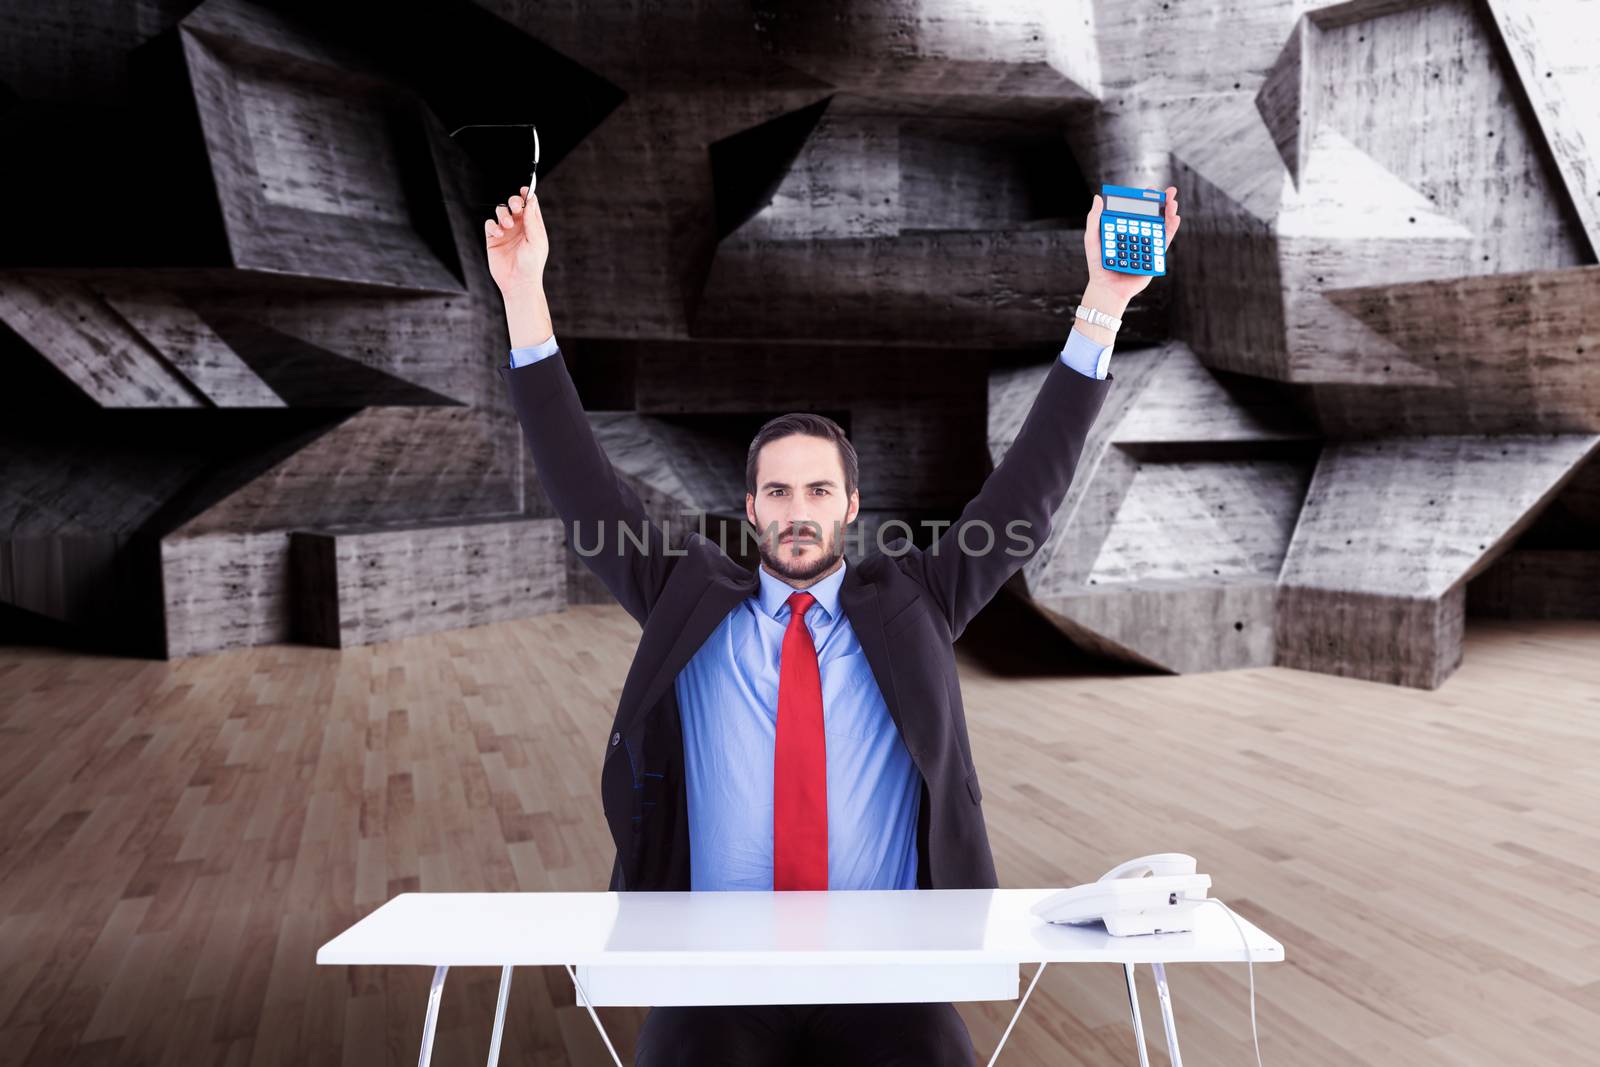 Businessman holding up reading glasses and calculator against abstract room